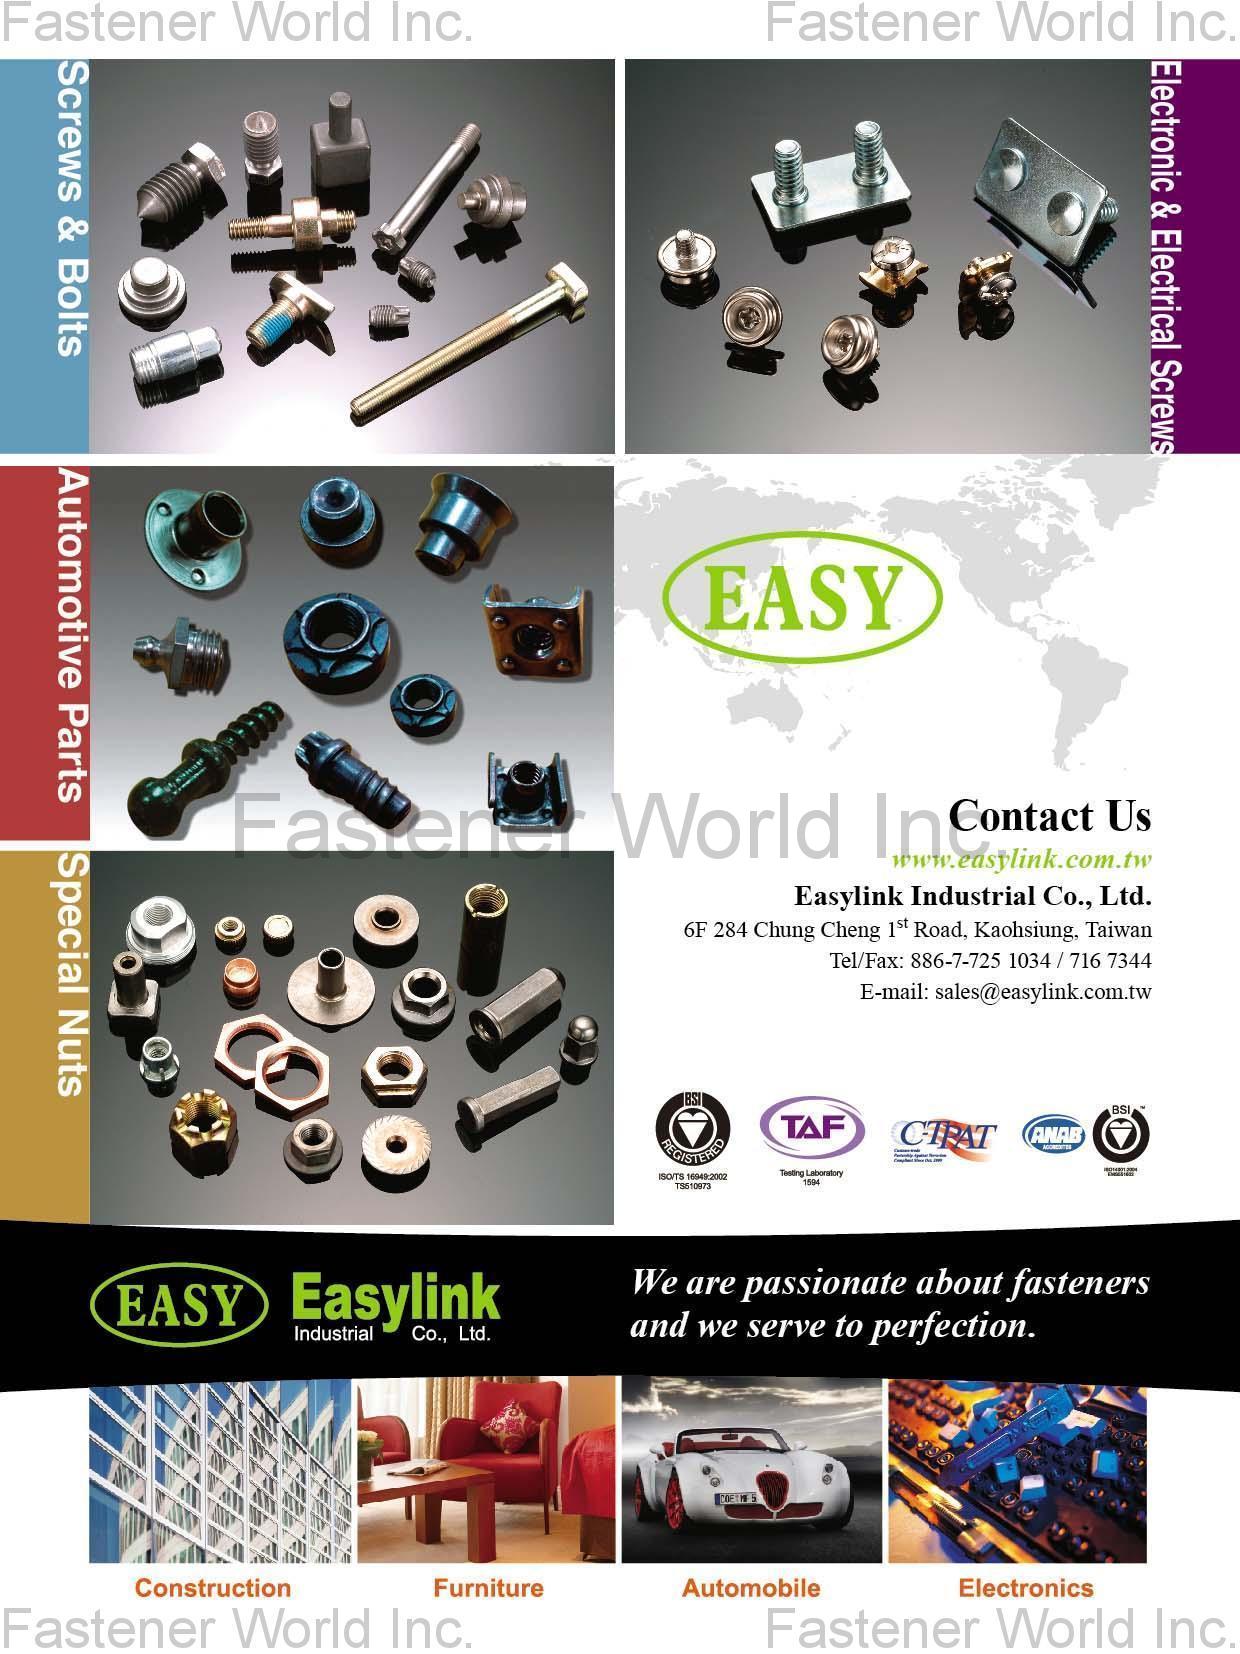 EASYLINK INDUSTRIAL CO., LTD. , Screws & Bolts, Automotive Parts, Electronic & Electrical Screws, Special Nuts , All Kinds of Screws